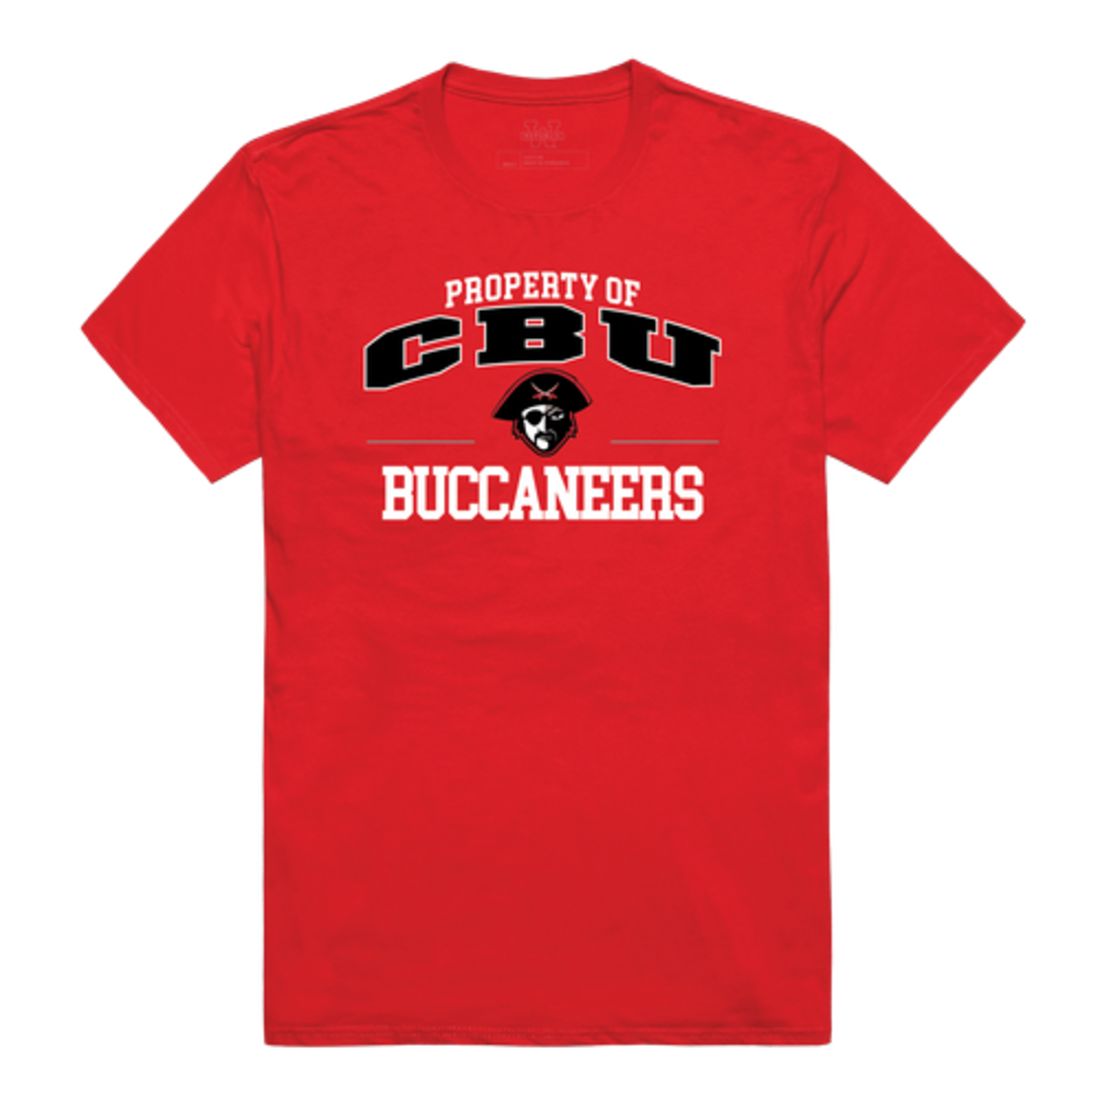 Christian Brothers University Buccaneers Property T-Shirt Tee